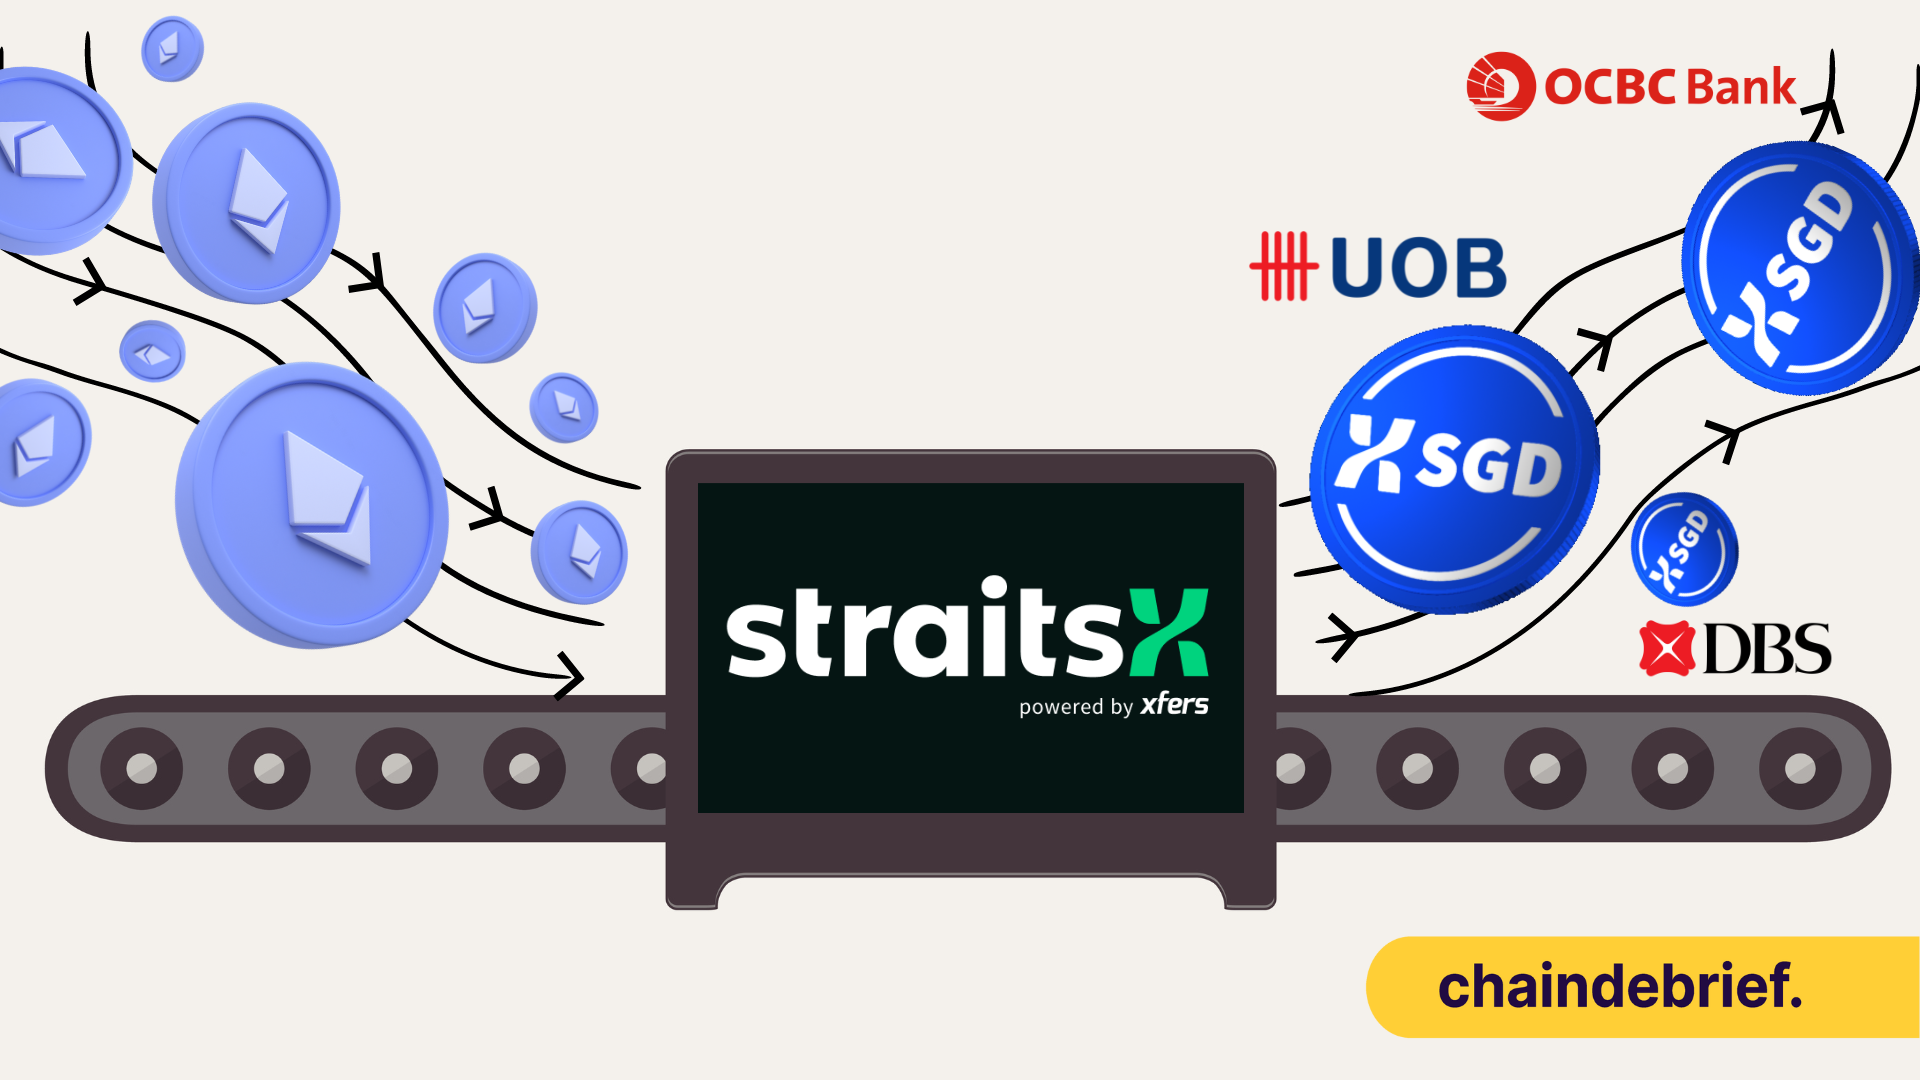 Off-Ramp Your Crypto Directly To Your DBS/UOB Account With StraitsX